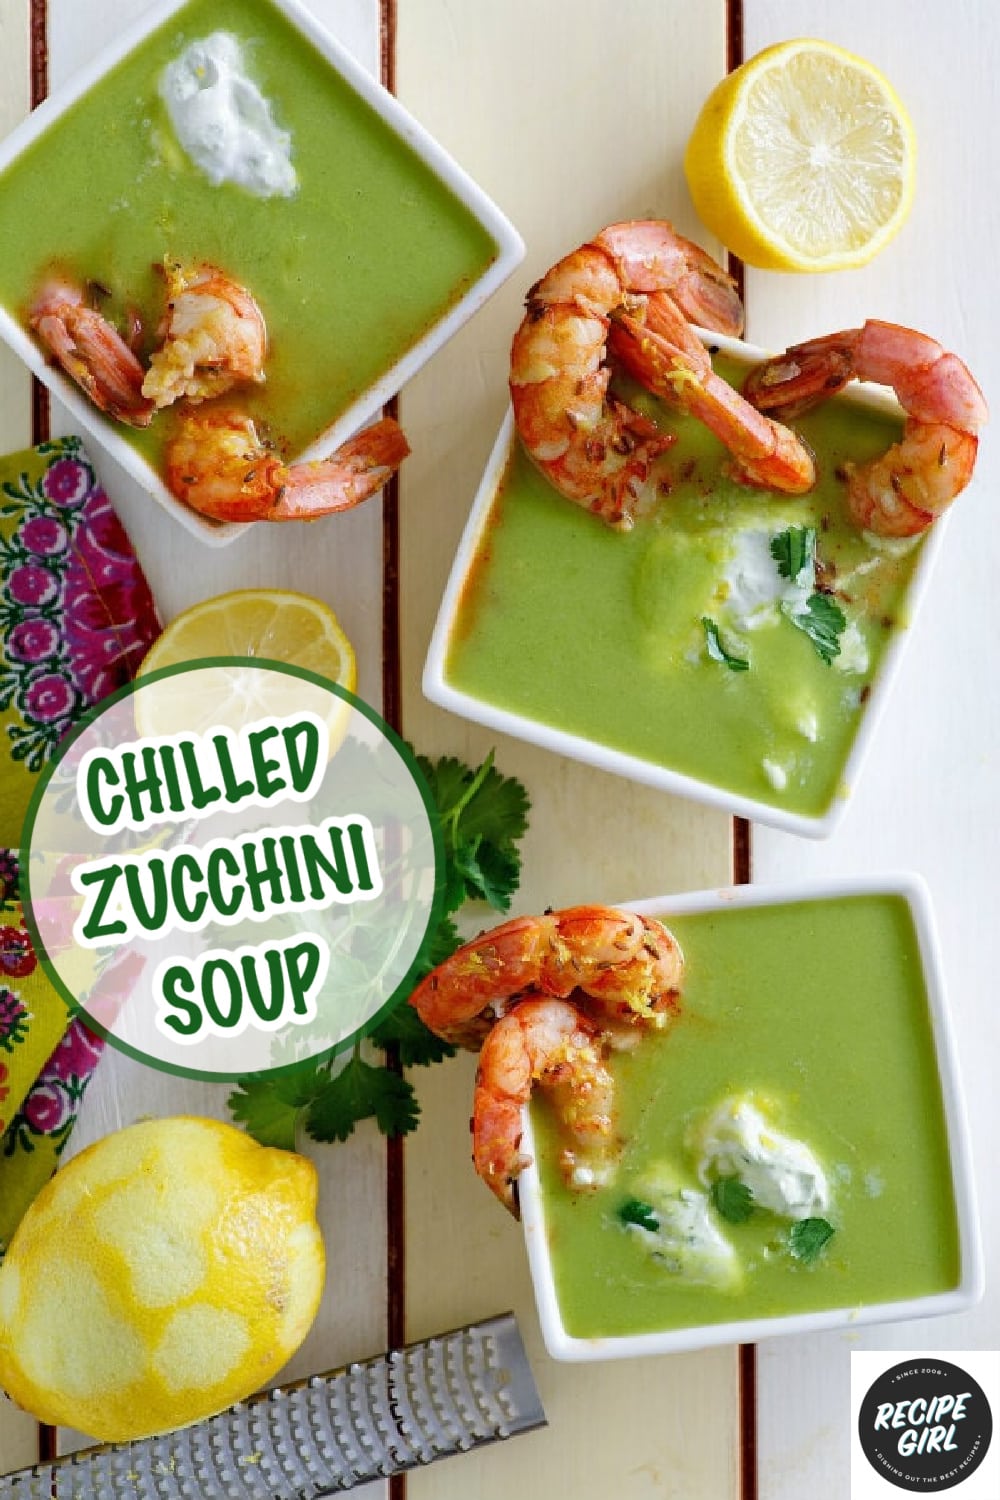 Chilled Zucchini Soup with Shrimp - Recipe Girl